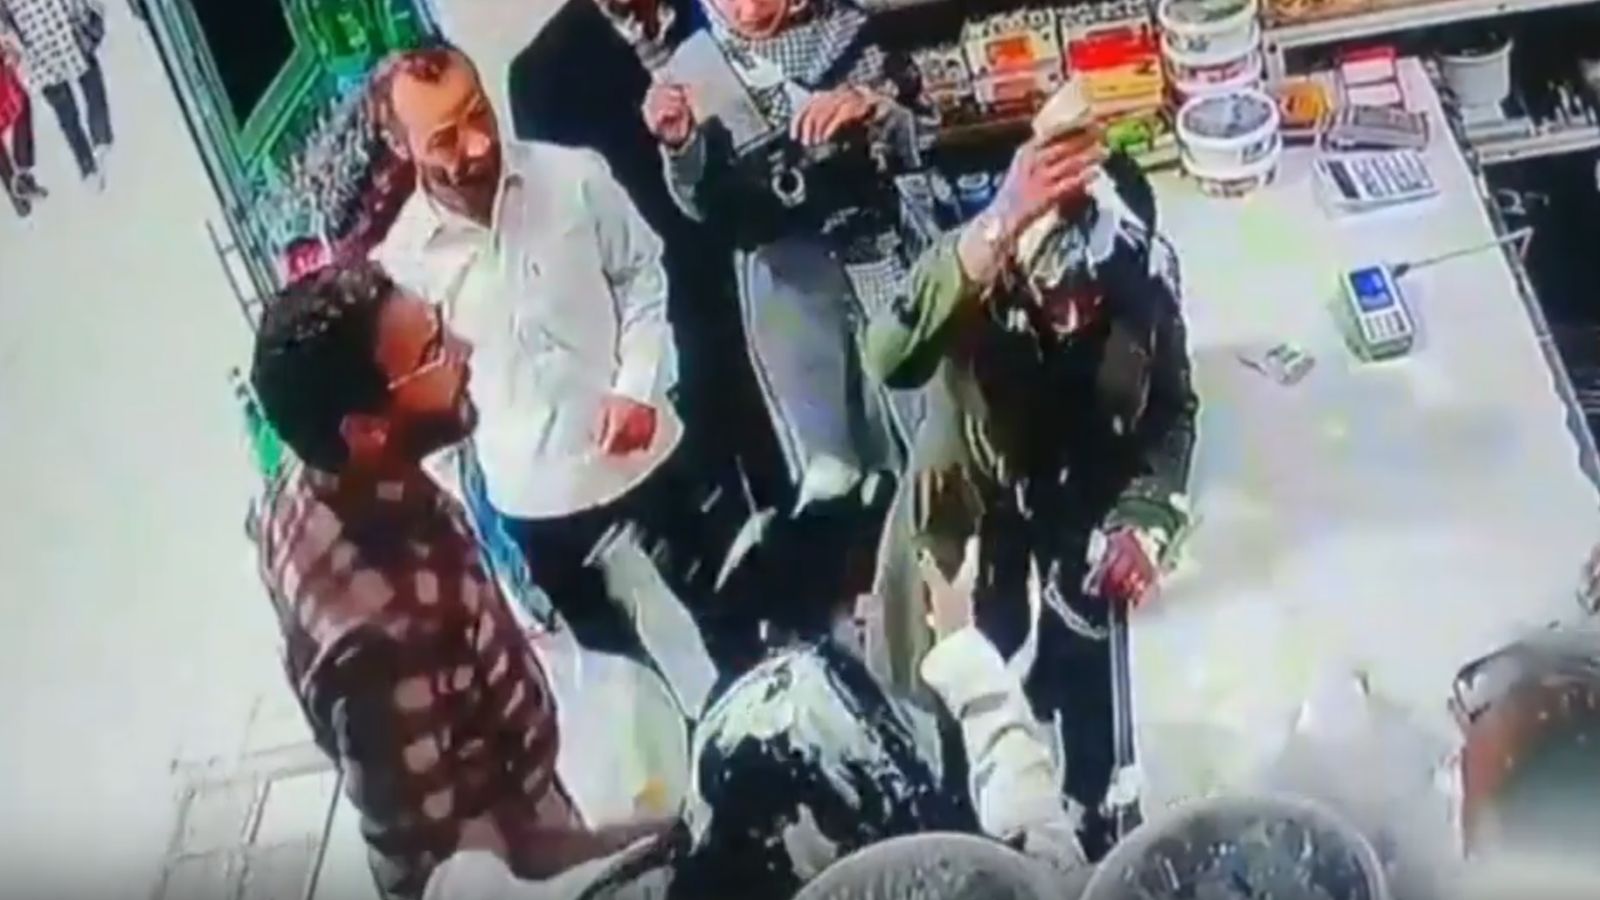 Yoghurt thrown over women in Iran for not covering their hair